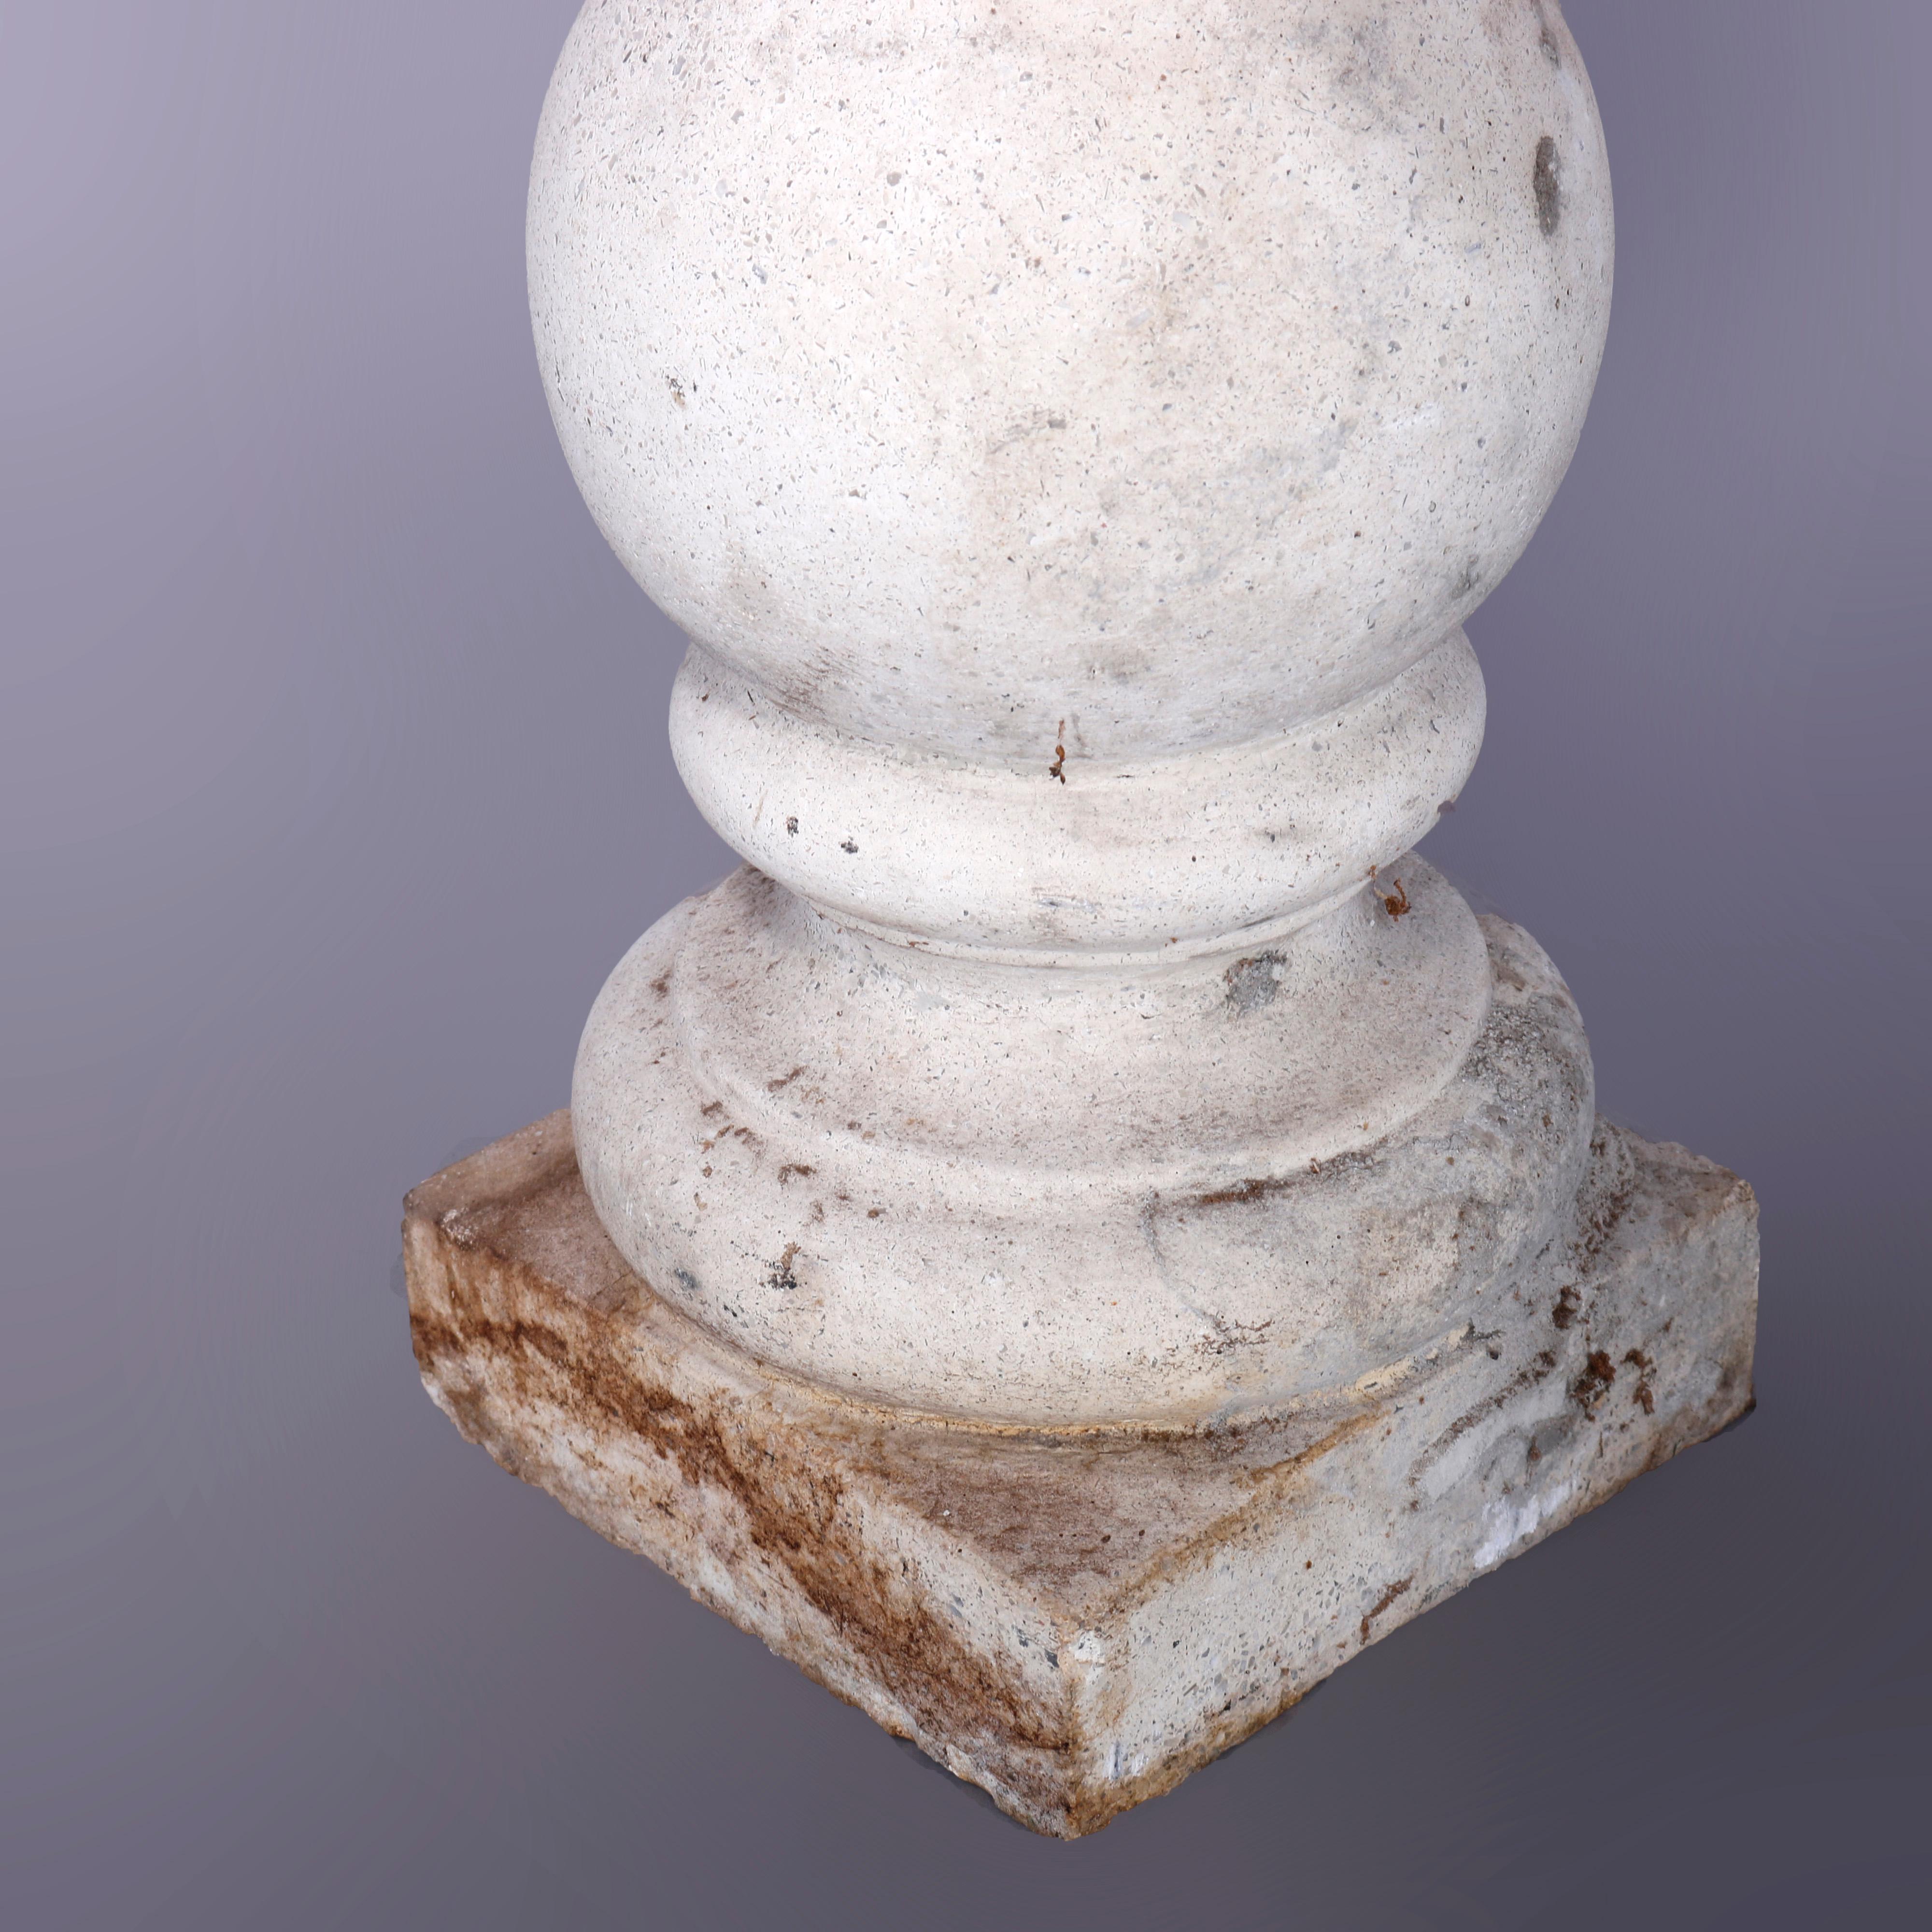 Classical Cast Hard Stone Balustrade Sculpture or Plant Display Pedestal 20th C For Sale 3